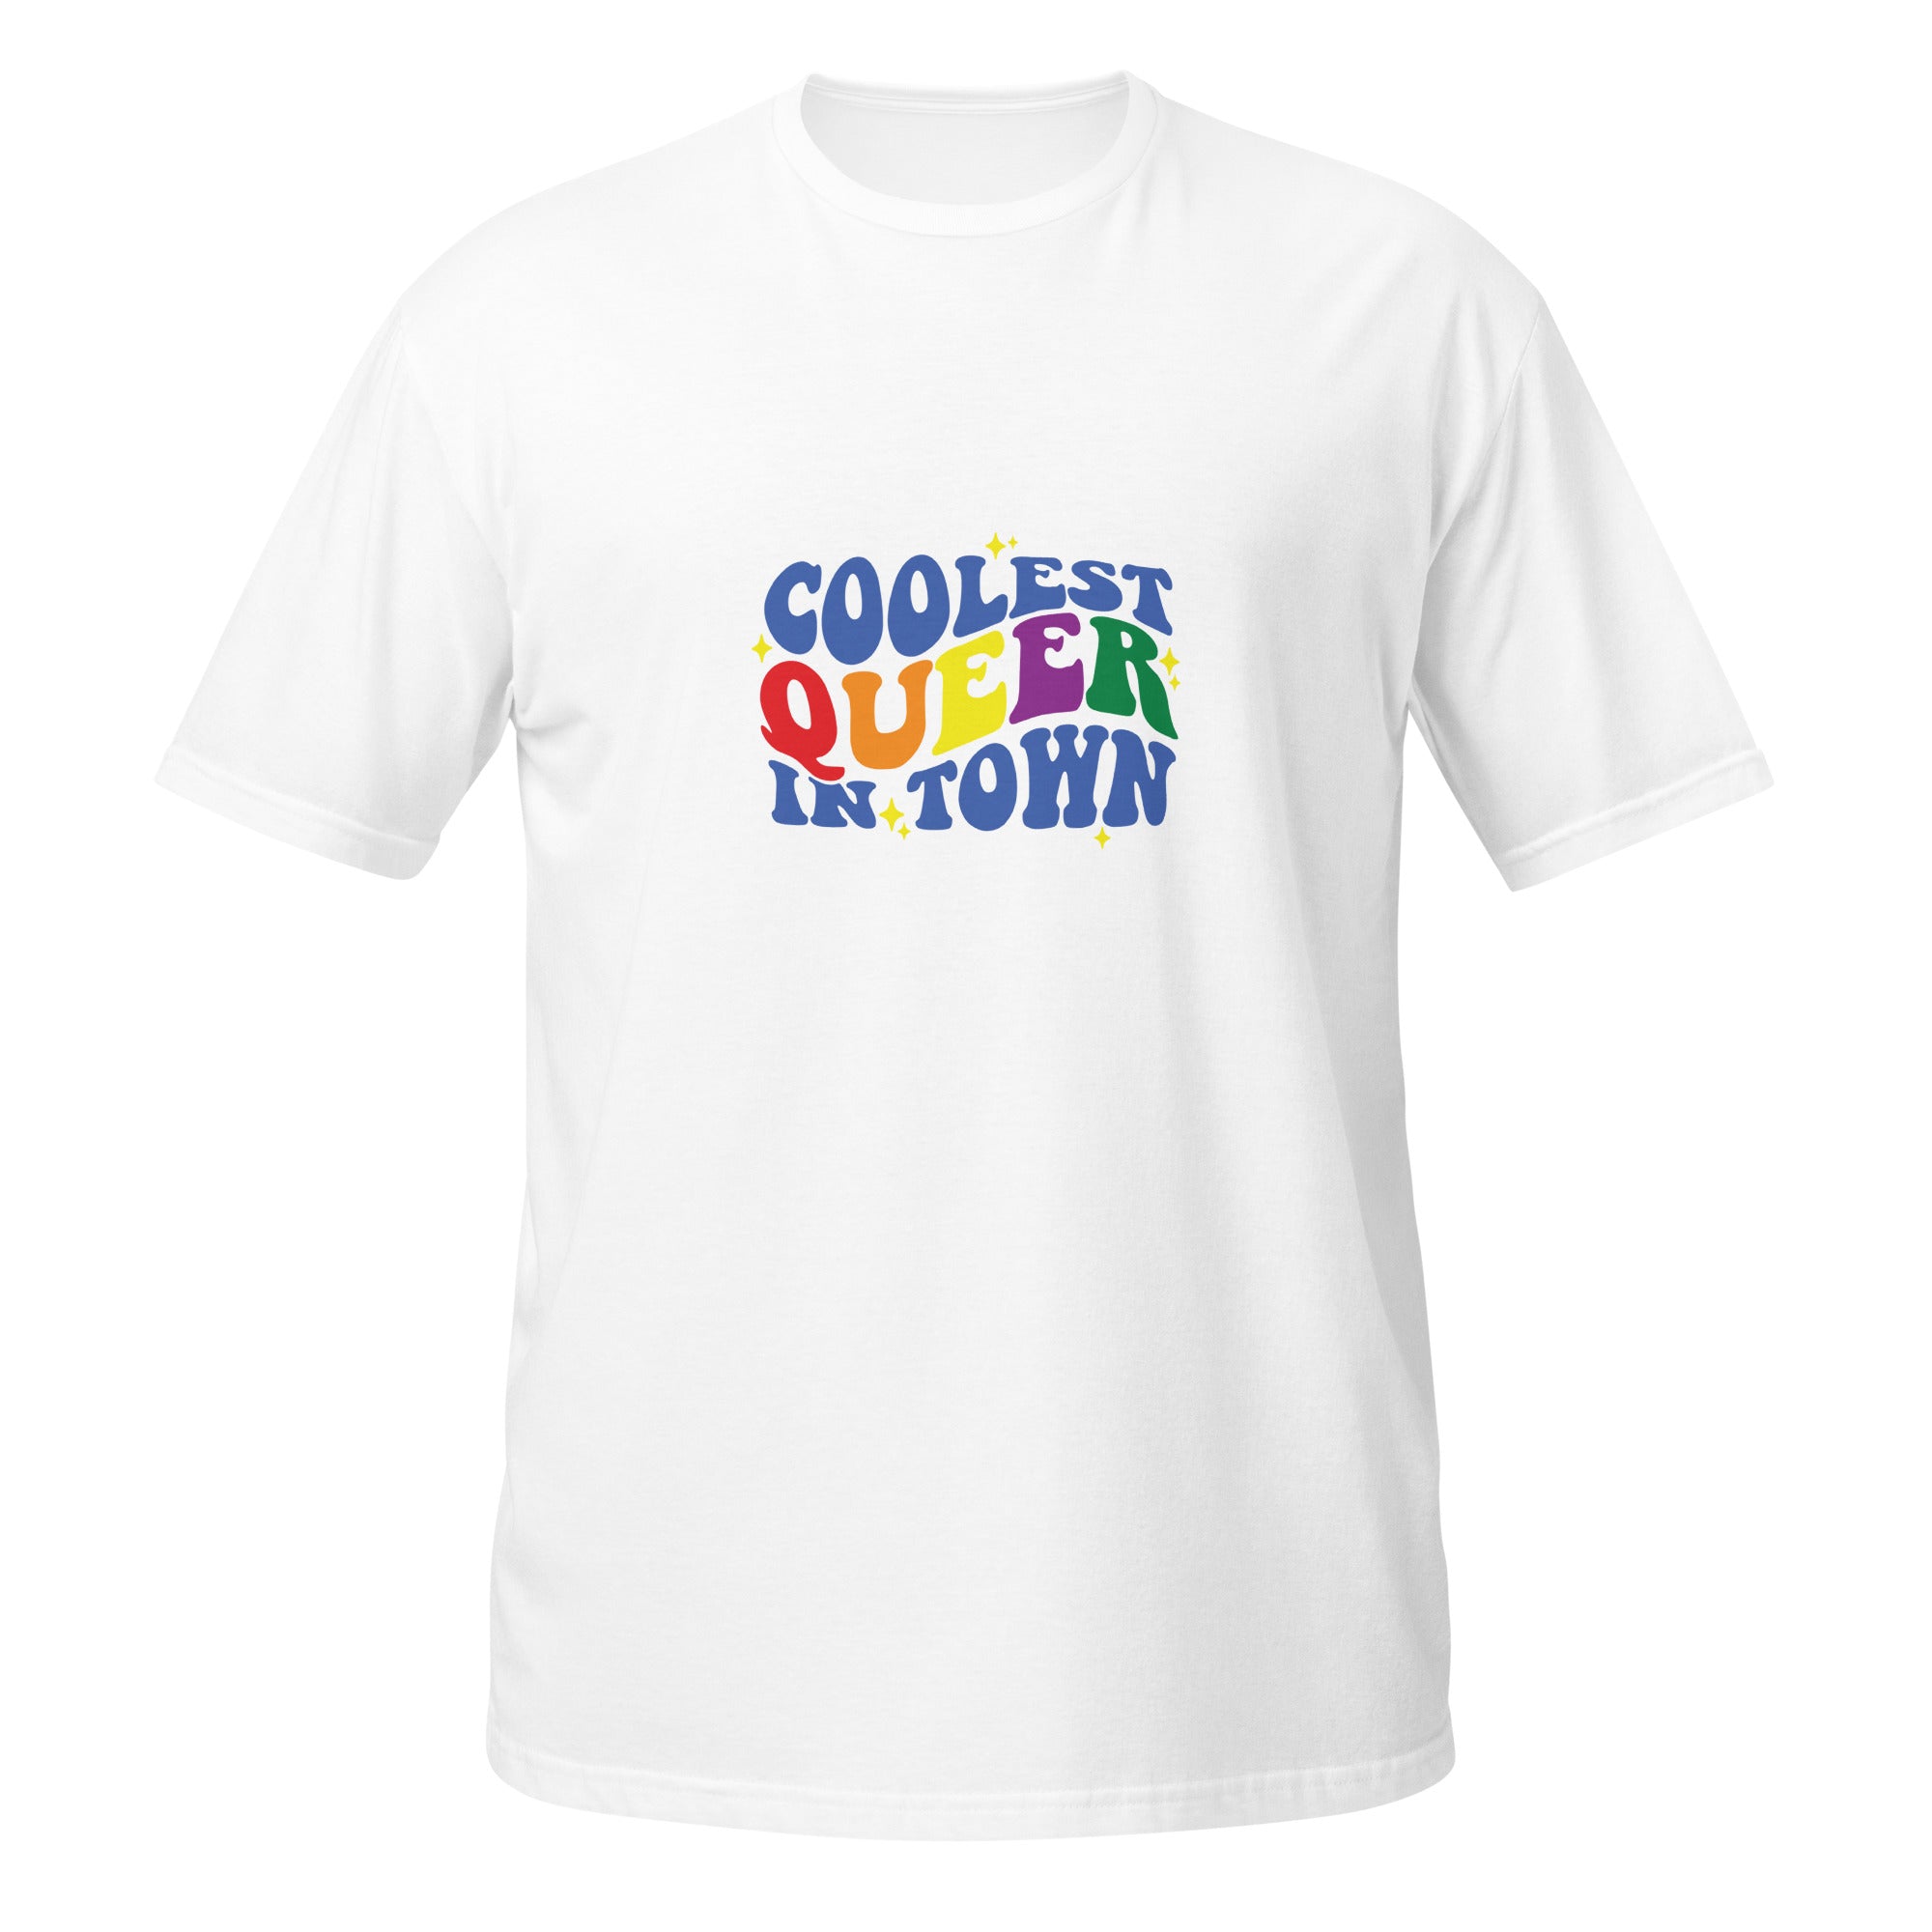 Short-Sleeve Unisex T-Shirt- Coolest queer in town